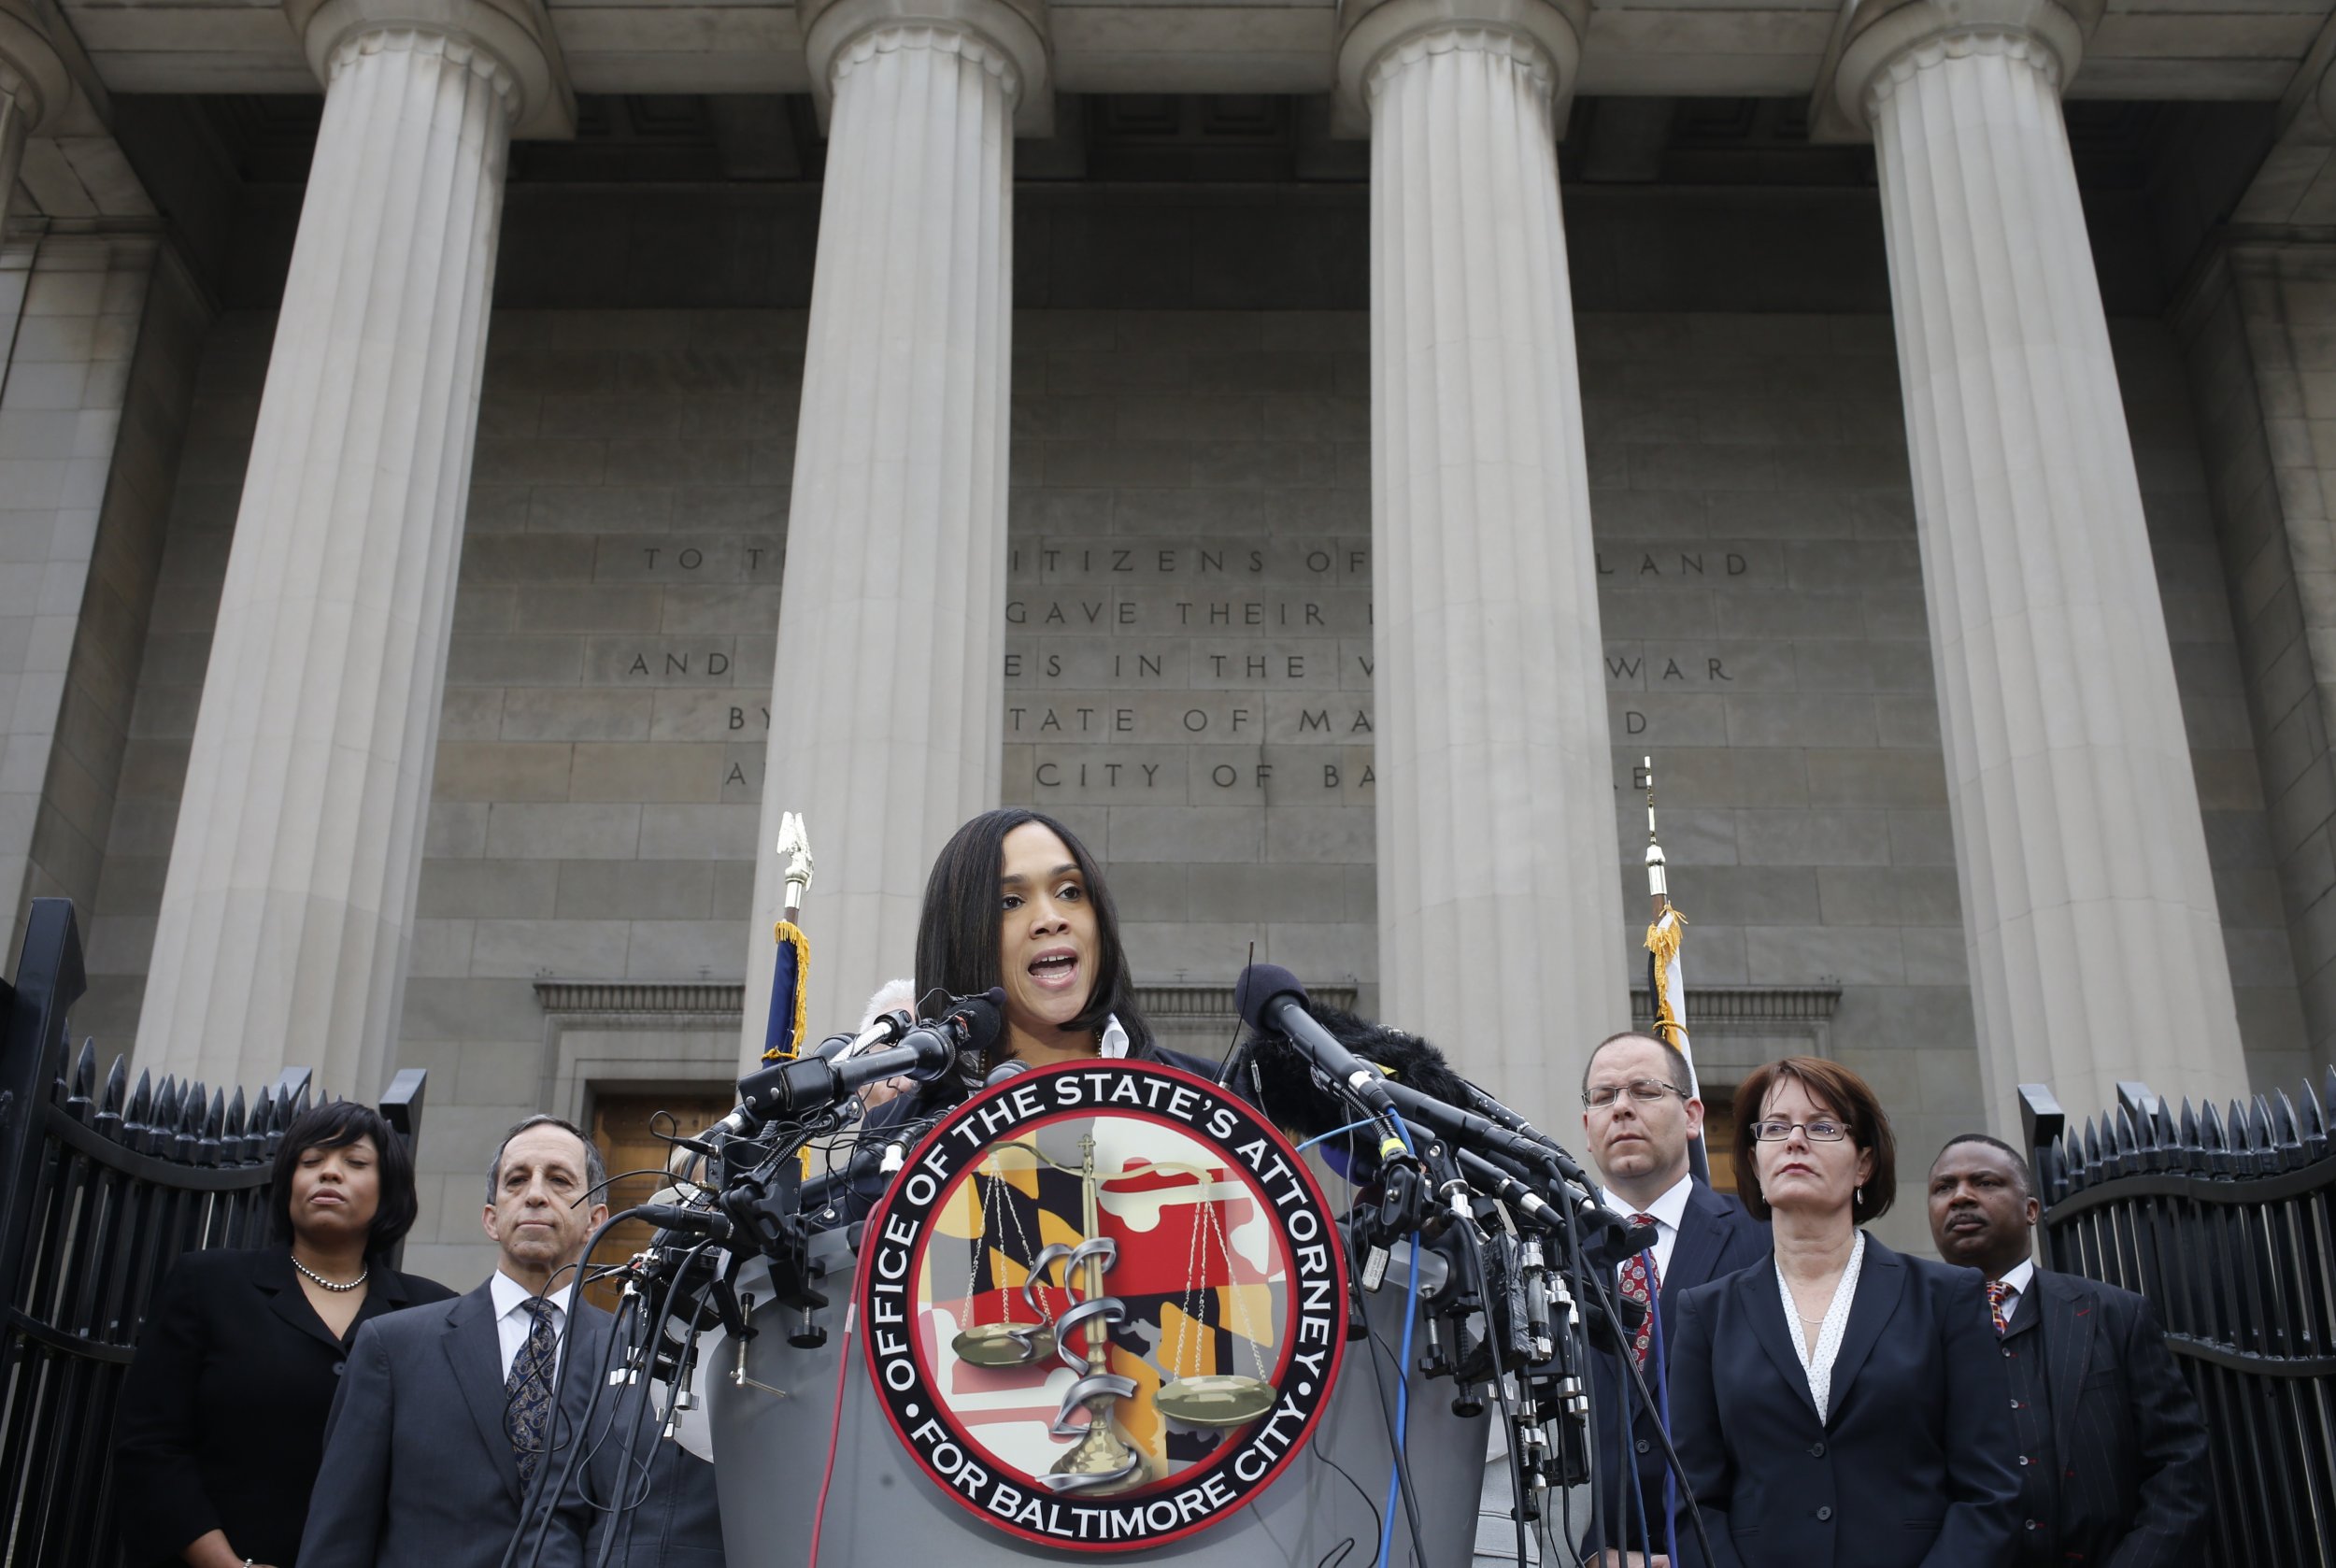 Second Degree Murder Charge for Cops in Freddie Gray Death